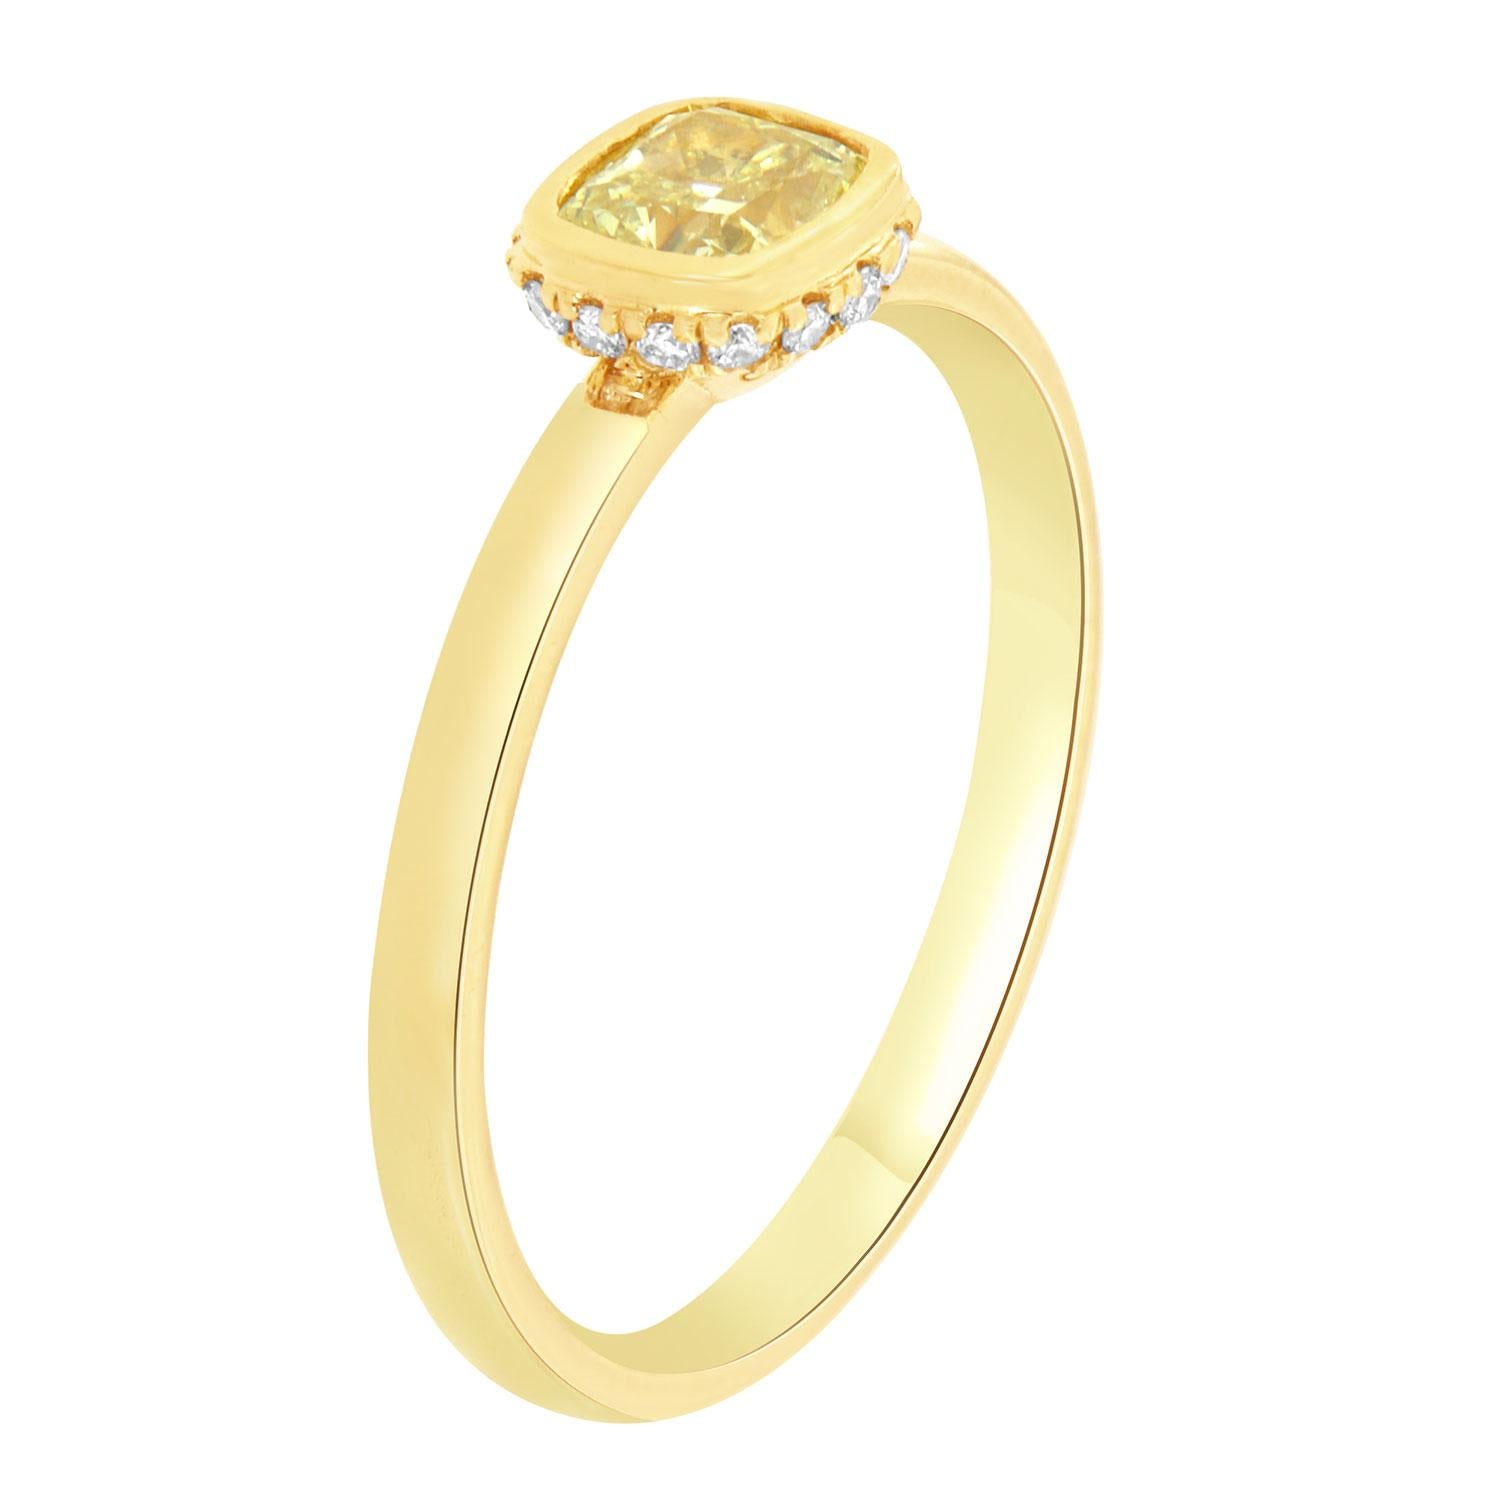 This beautiful 18K yellow gold ring features a 0.52 Carat Elongated Cushion-shaped Natural Yellow Diamond bezel set. A hidden halo of brilliant round diamonds encircled the crown on top of a 1.9 mm wide band. 
The yellow diamond is certified by EGL